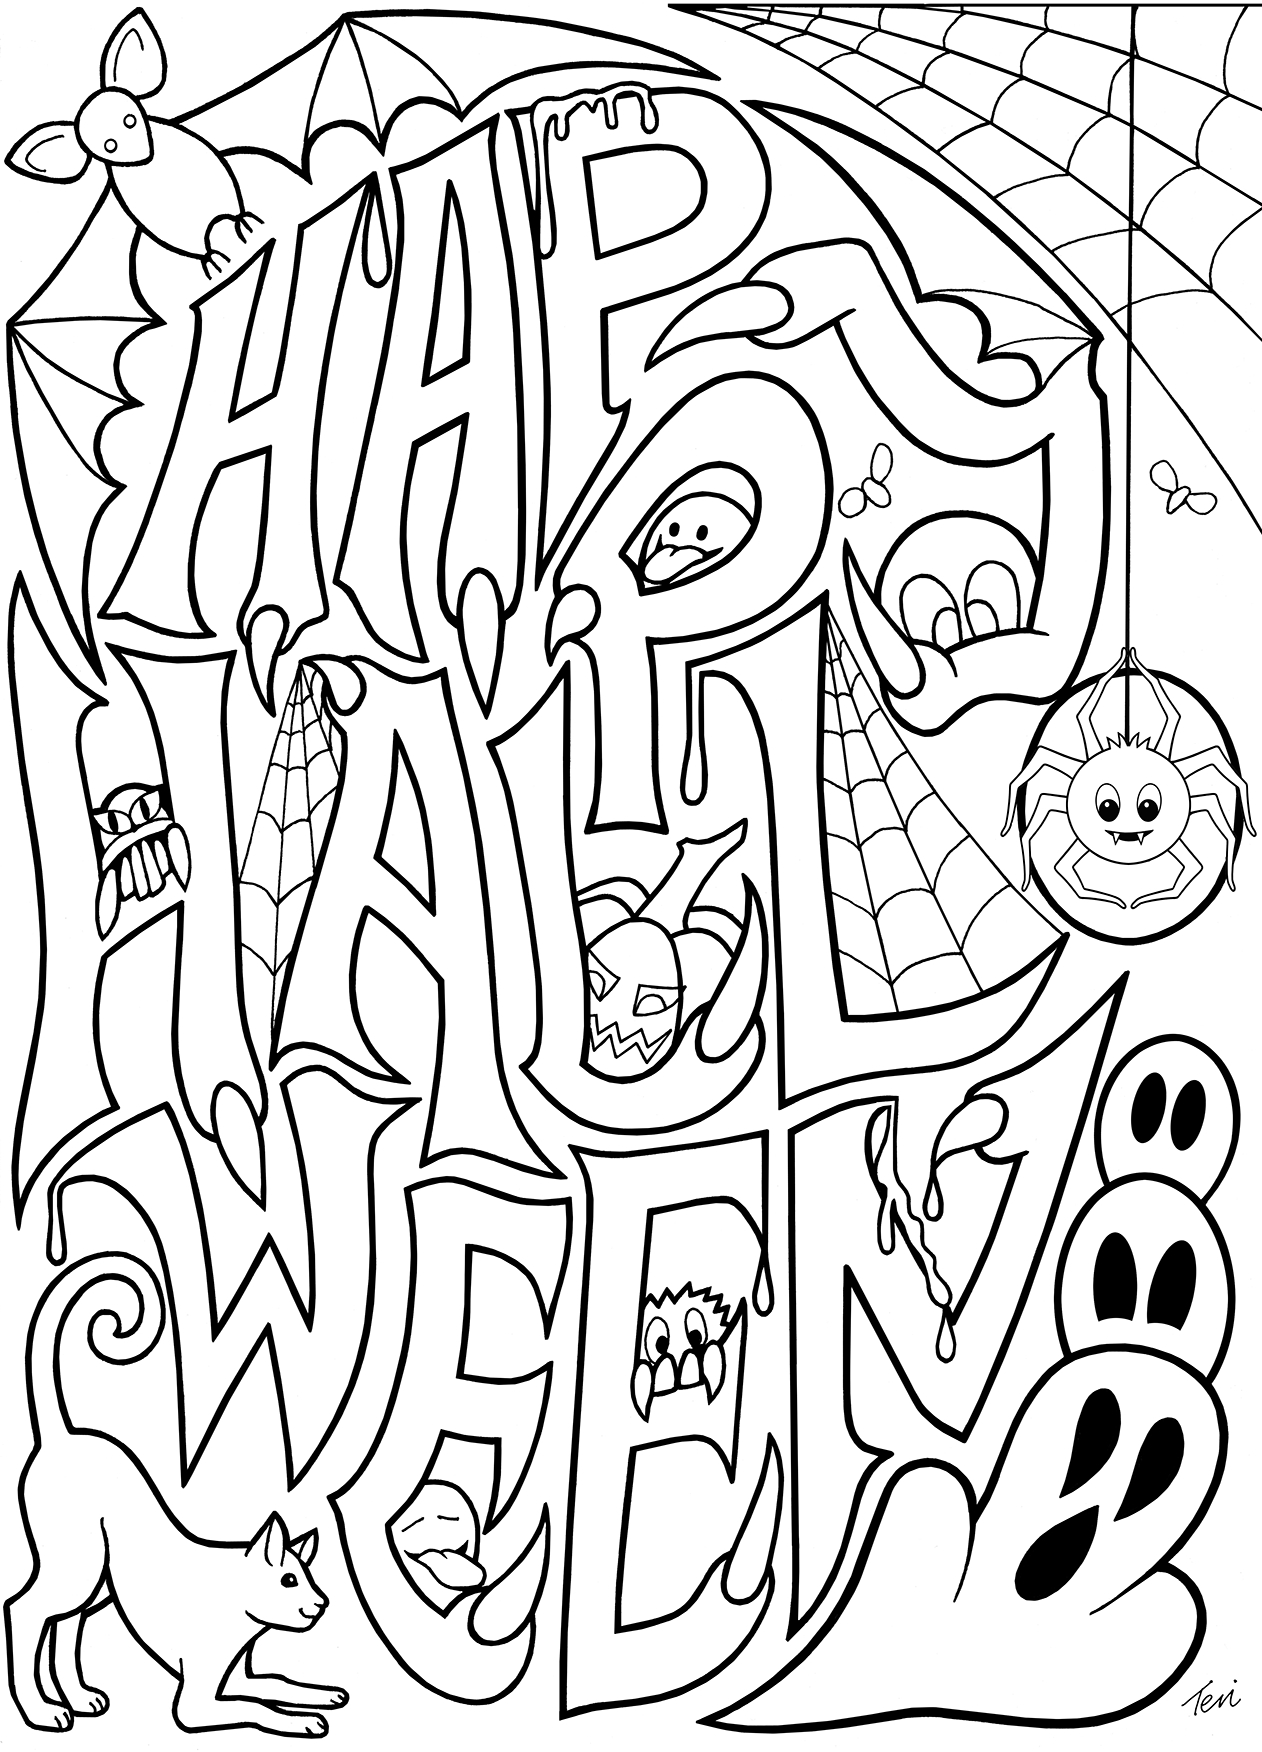 Free Printable Halloween Coloring Pages For Adults At GetDrawings 